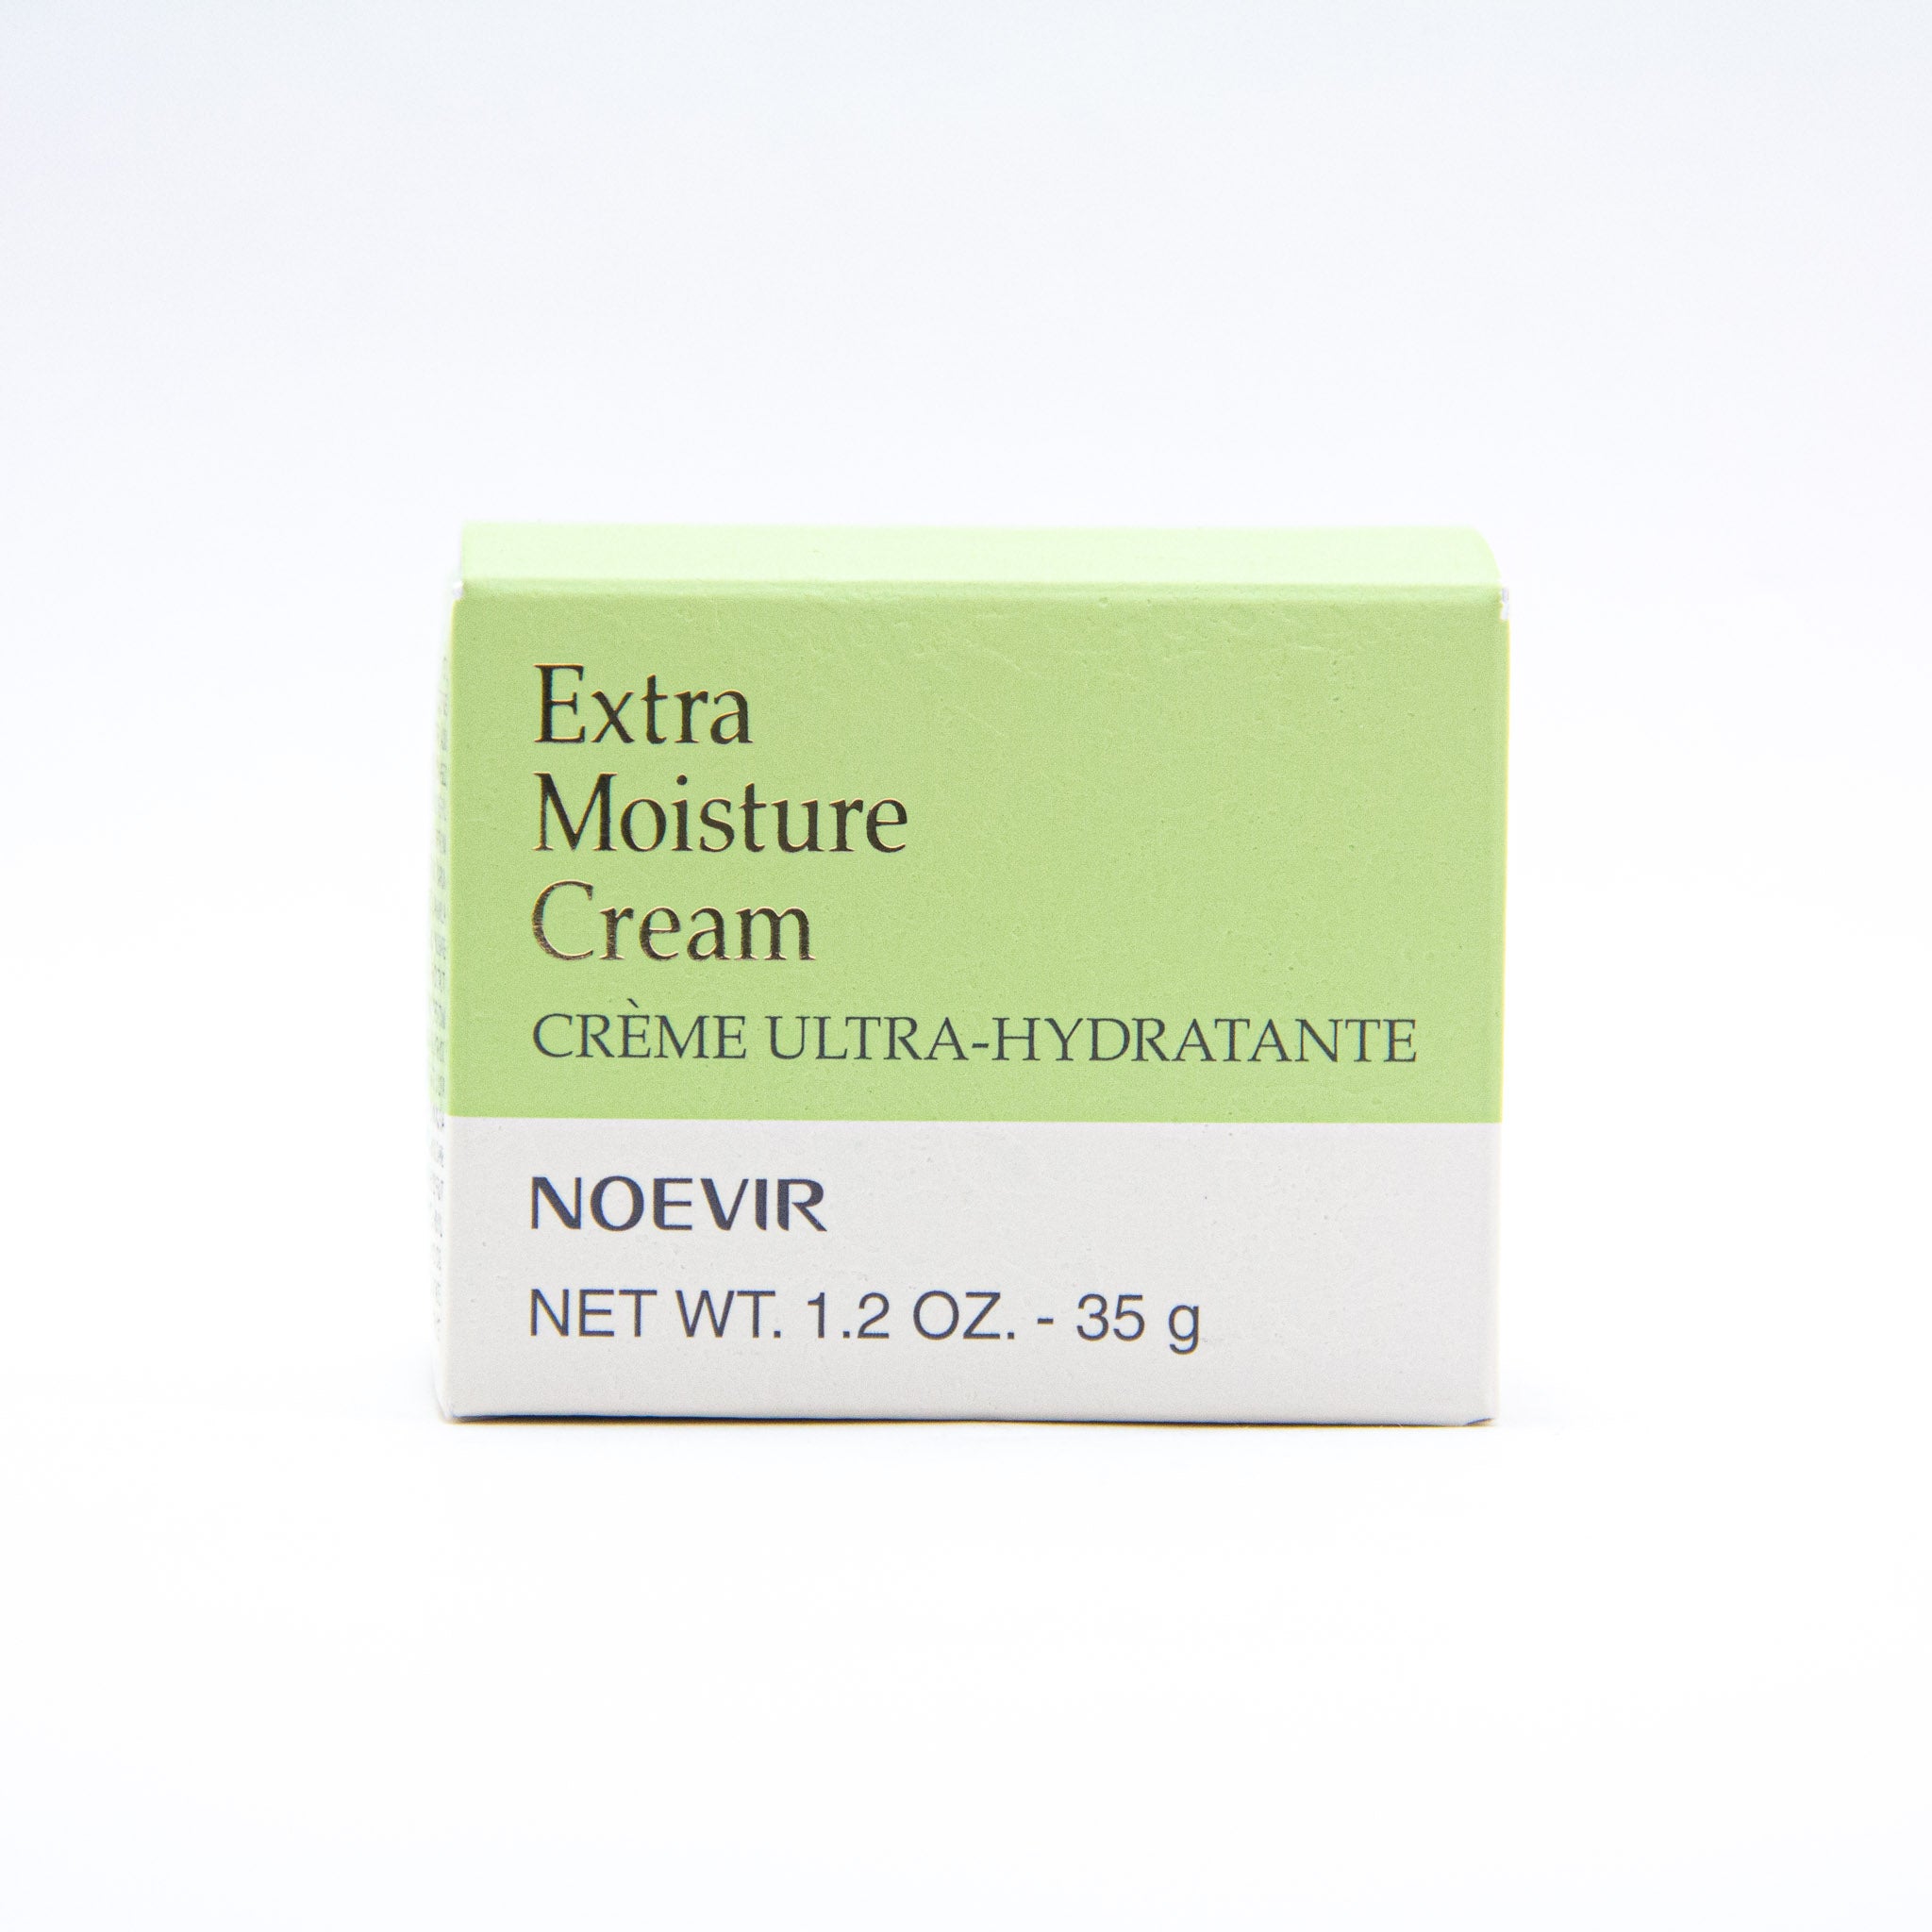 Noevir Extra Moisture Cream, 1.2 oz:   This ream provides rich moisture, softens skin texture and provides a smoother surface for makeup application. A powerful blend of antioxidants hydrate the skin and protect against free-radical damage. Can be used as a treatment enriched moisture cream with other Noevir skincare lines.